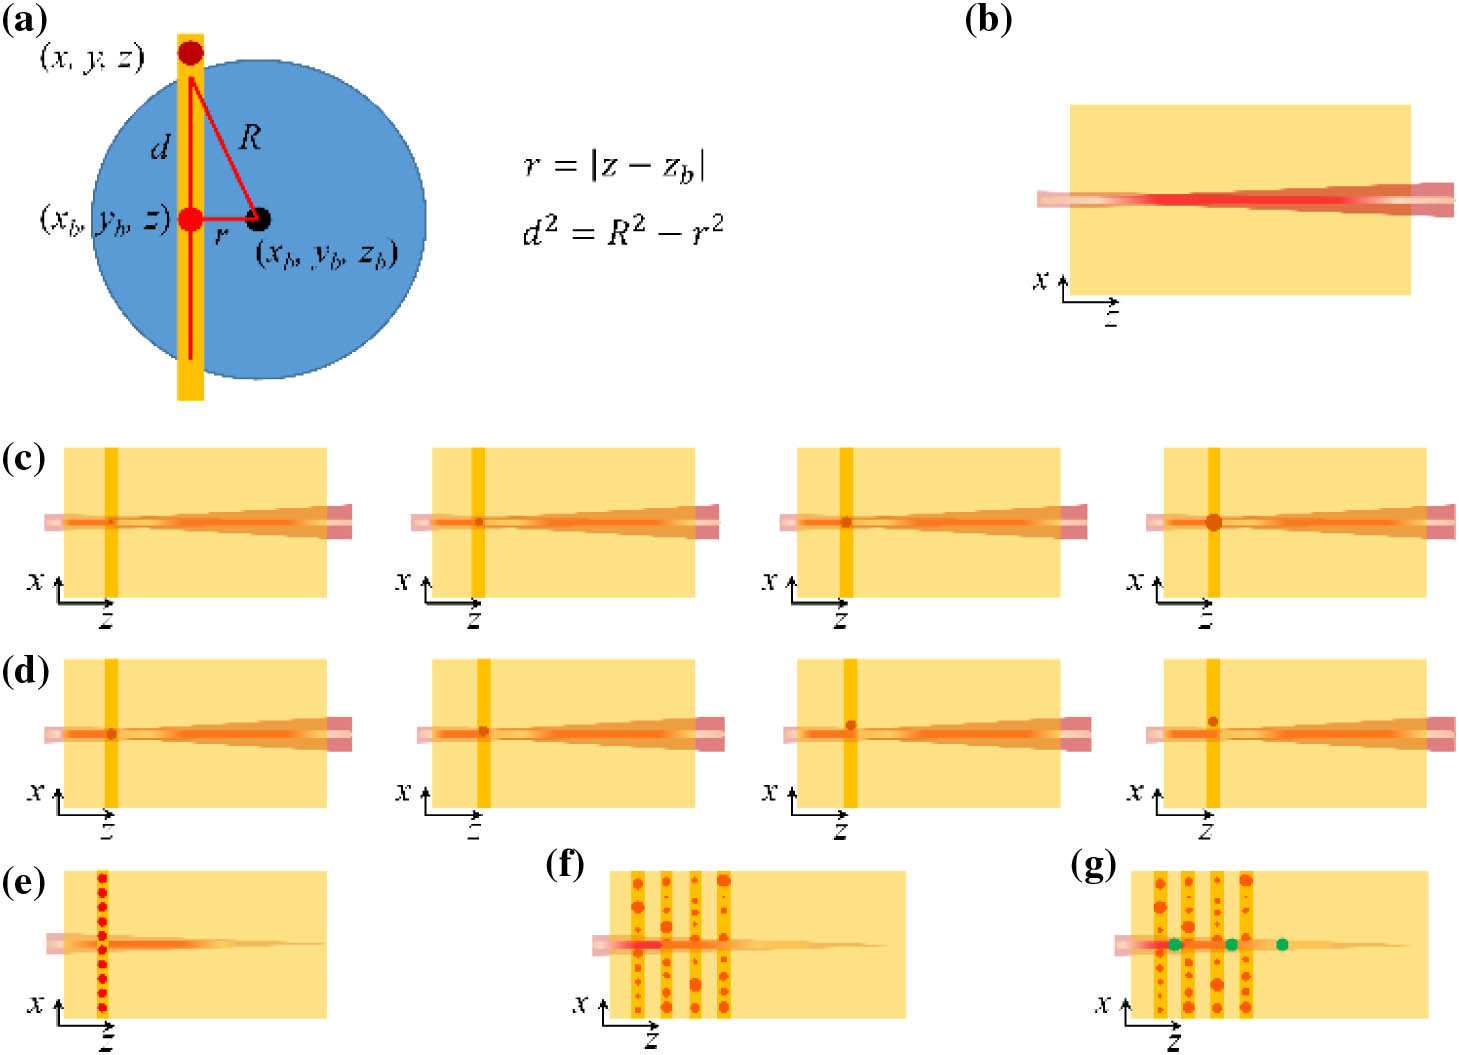 Schematic diagrams of the geometry of the added glass beads and of the simulated experimental conditions. (a) Schematic showing of geometrical parameters to determine the variation of the refractive index according to Eqs. (5) and (6). (b) Bessel beam propagation and SRS signal generation in free space. (c)–(f) Bessel beam propagation and SRS signal generation in a scattering medium by adding (c) a bead of different sizes, (d) a bead at different positions, (e) single layered beads and (f) multilayered beads of different sizes (red circles indicate the scattering beads). The pale yellow, large rectangles in panels (b)–(f) represent the target chemicals that can generate SRS signals. (g) Experimental setup relevant to the Bessel beam-based SRS simulation in the presence of scattering beads (red circles) and small chemicals (green circles). The pale yellow, large rectangle here represents the propagation medium.